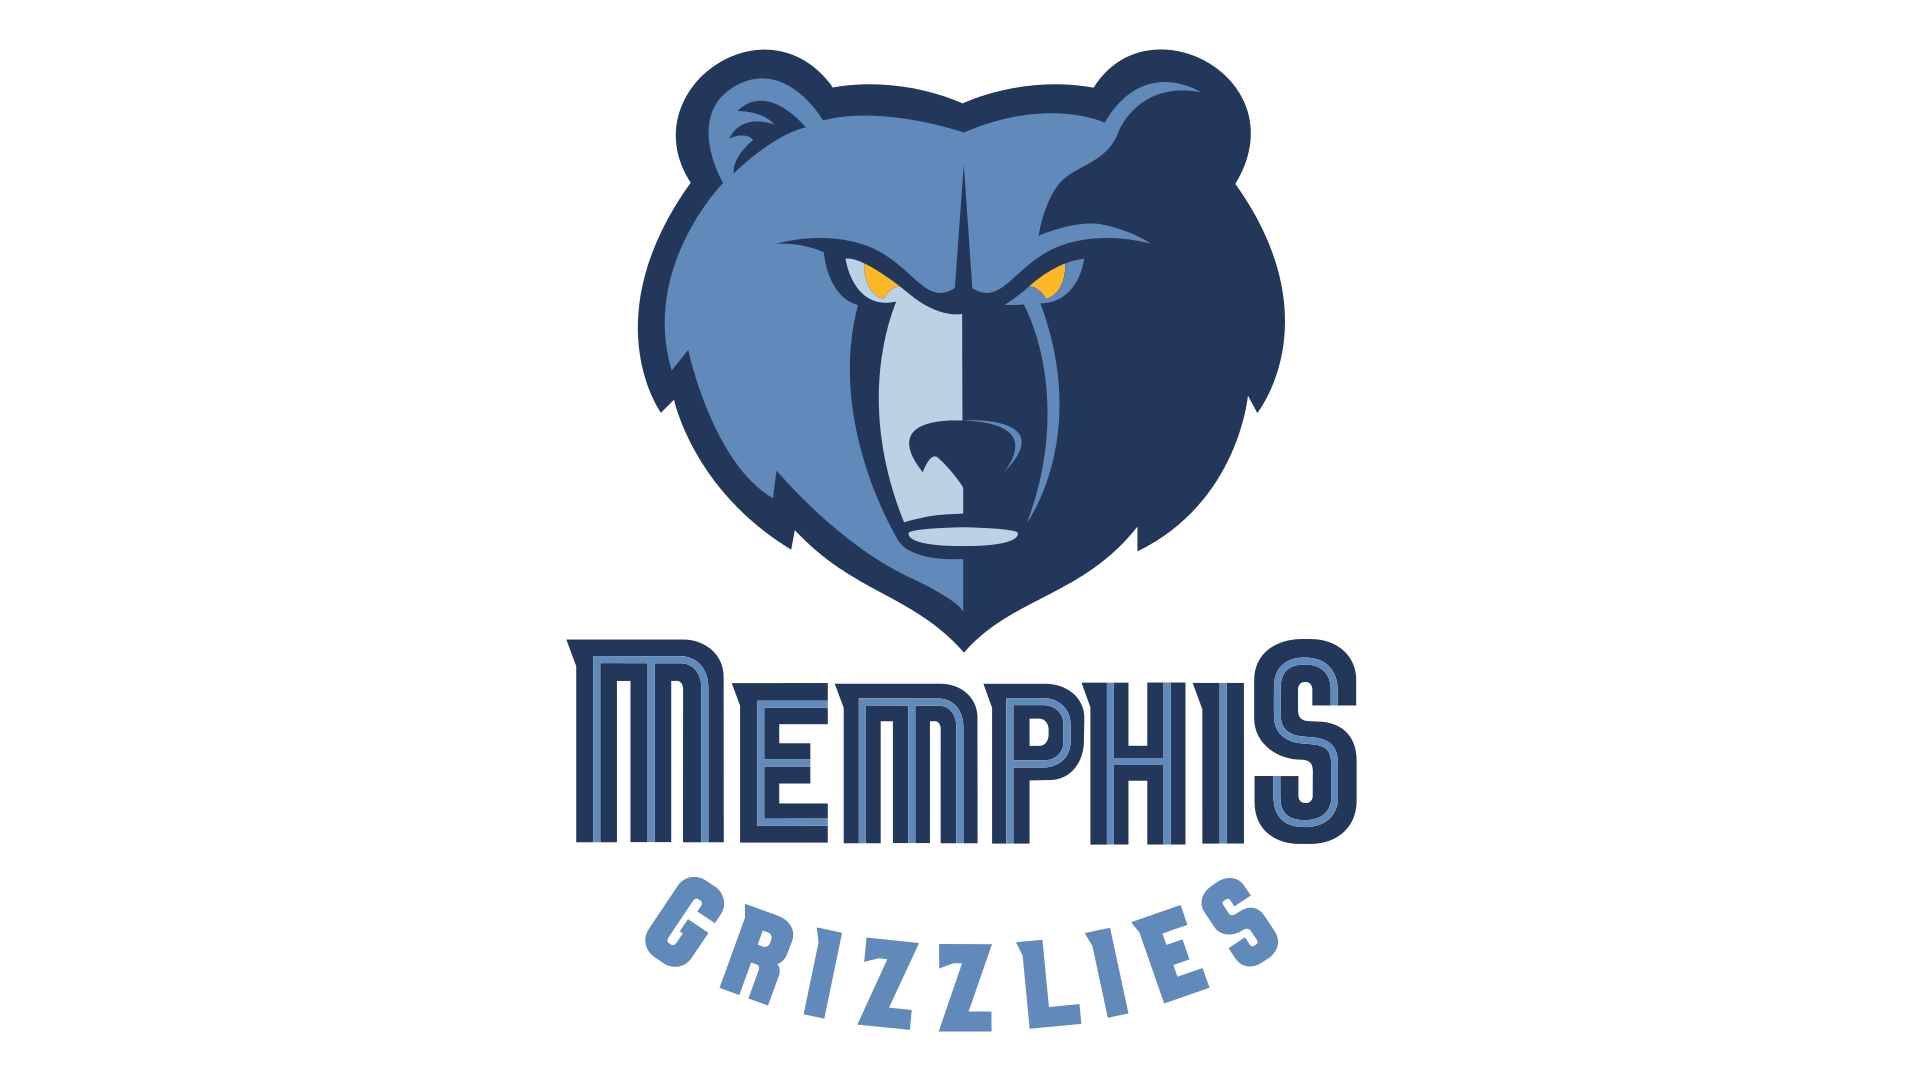 Memphis Grizzlies Logo - Memphis Grizzlies Logo, Memphis Grizzlies Symbol, Meaning, History ...